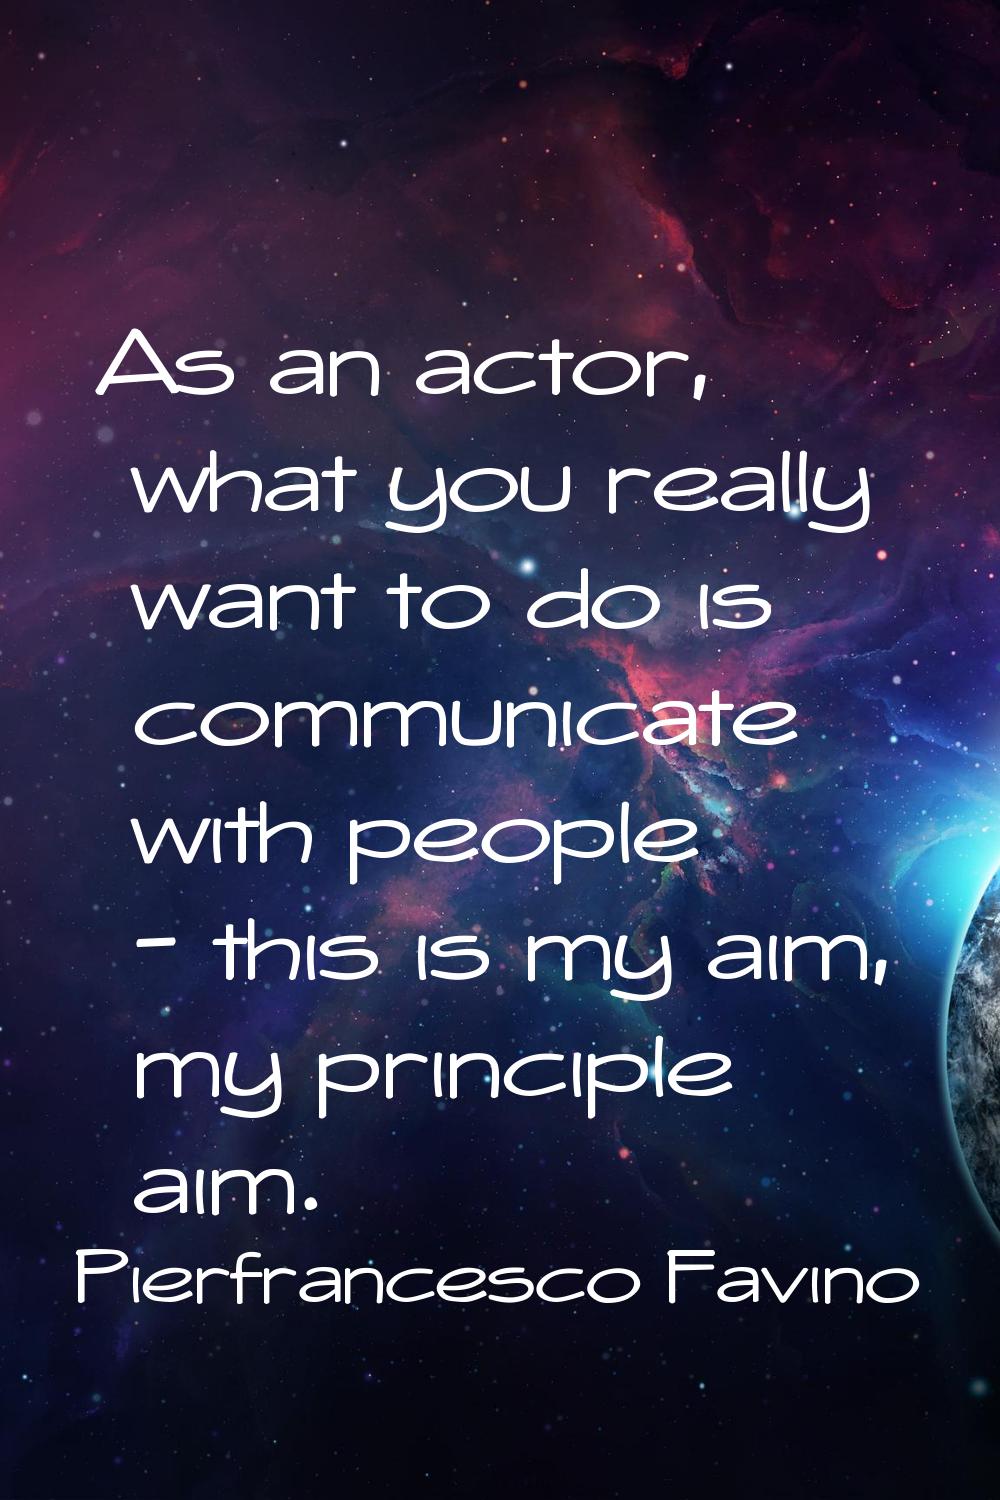 As an actor, what you really want to do is communicate with people - this is my aim, my principle a